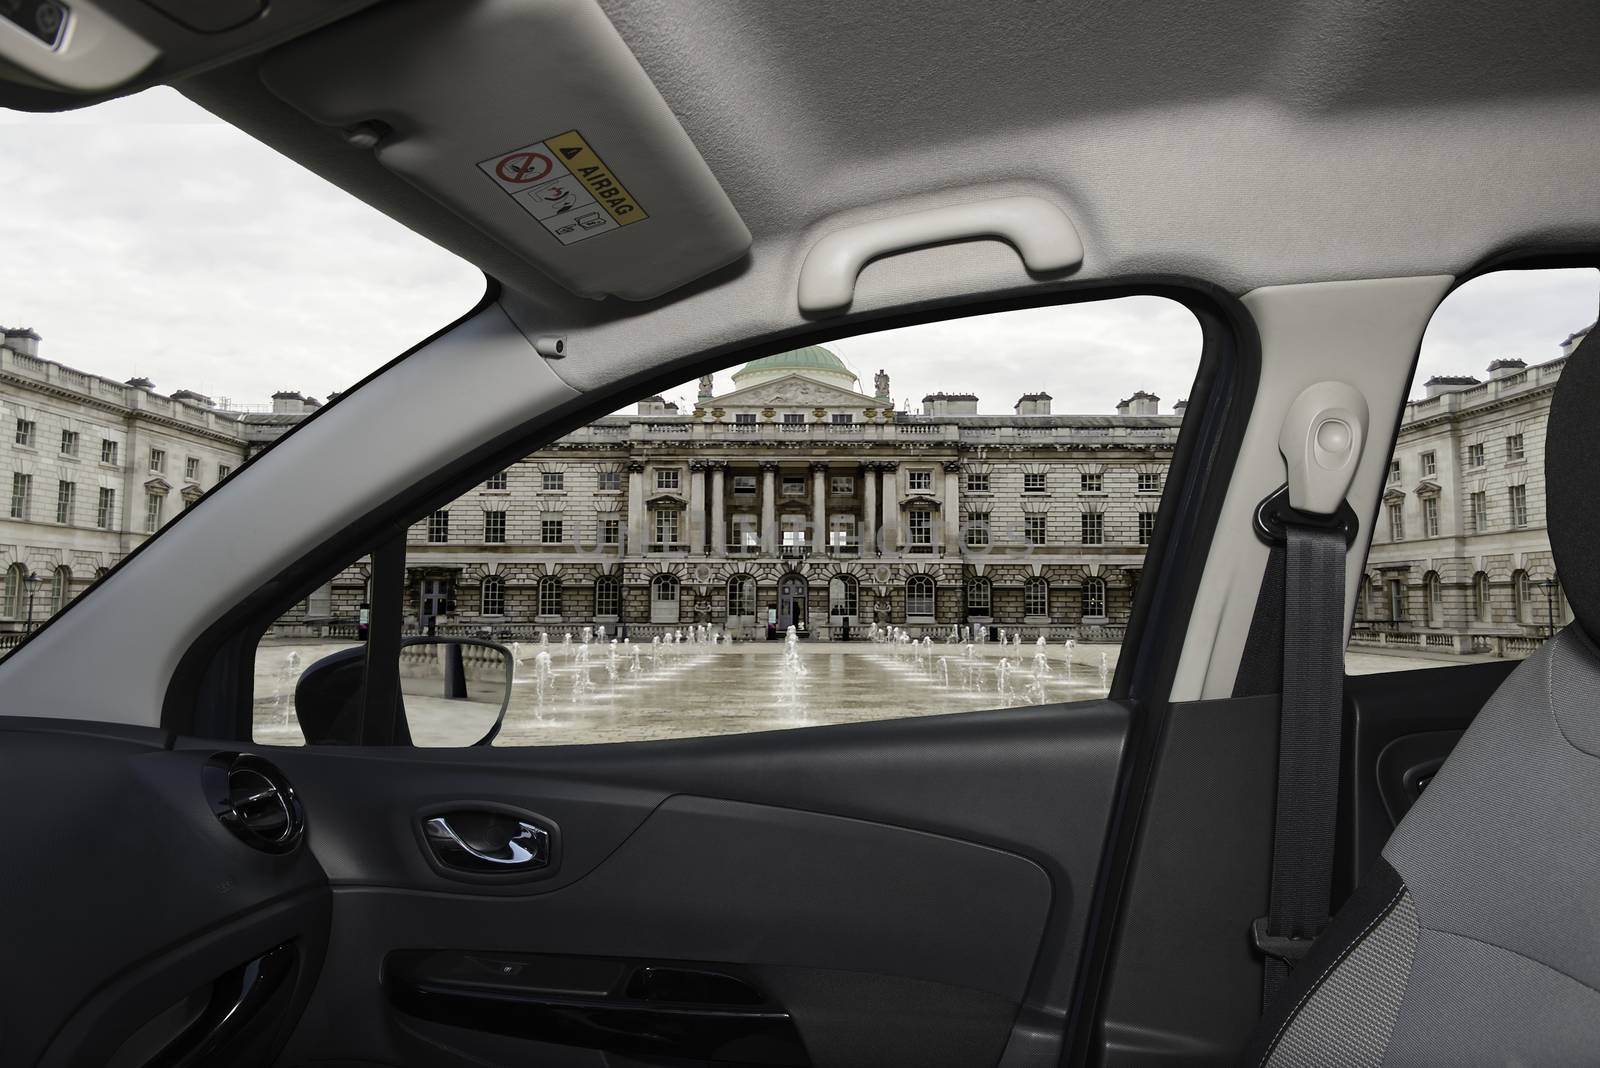 Looking through a car window with view of Somerset House, Victorian building in the Strand district of London, UK